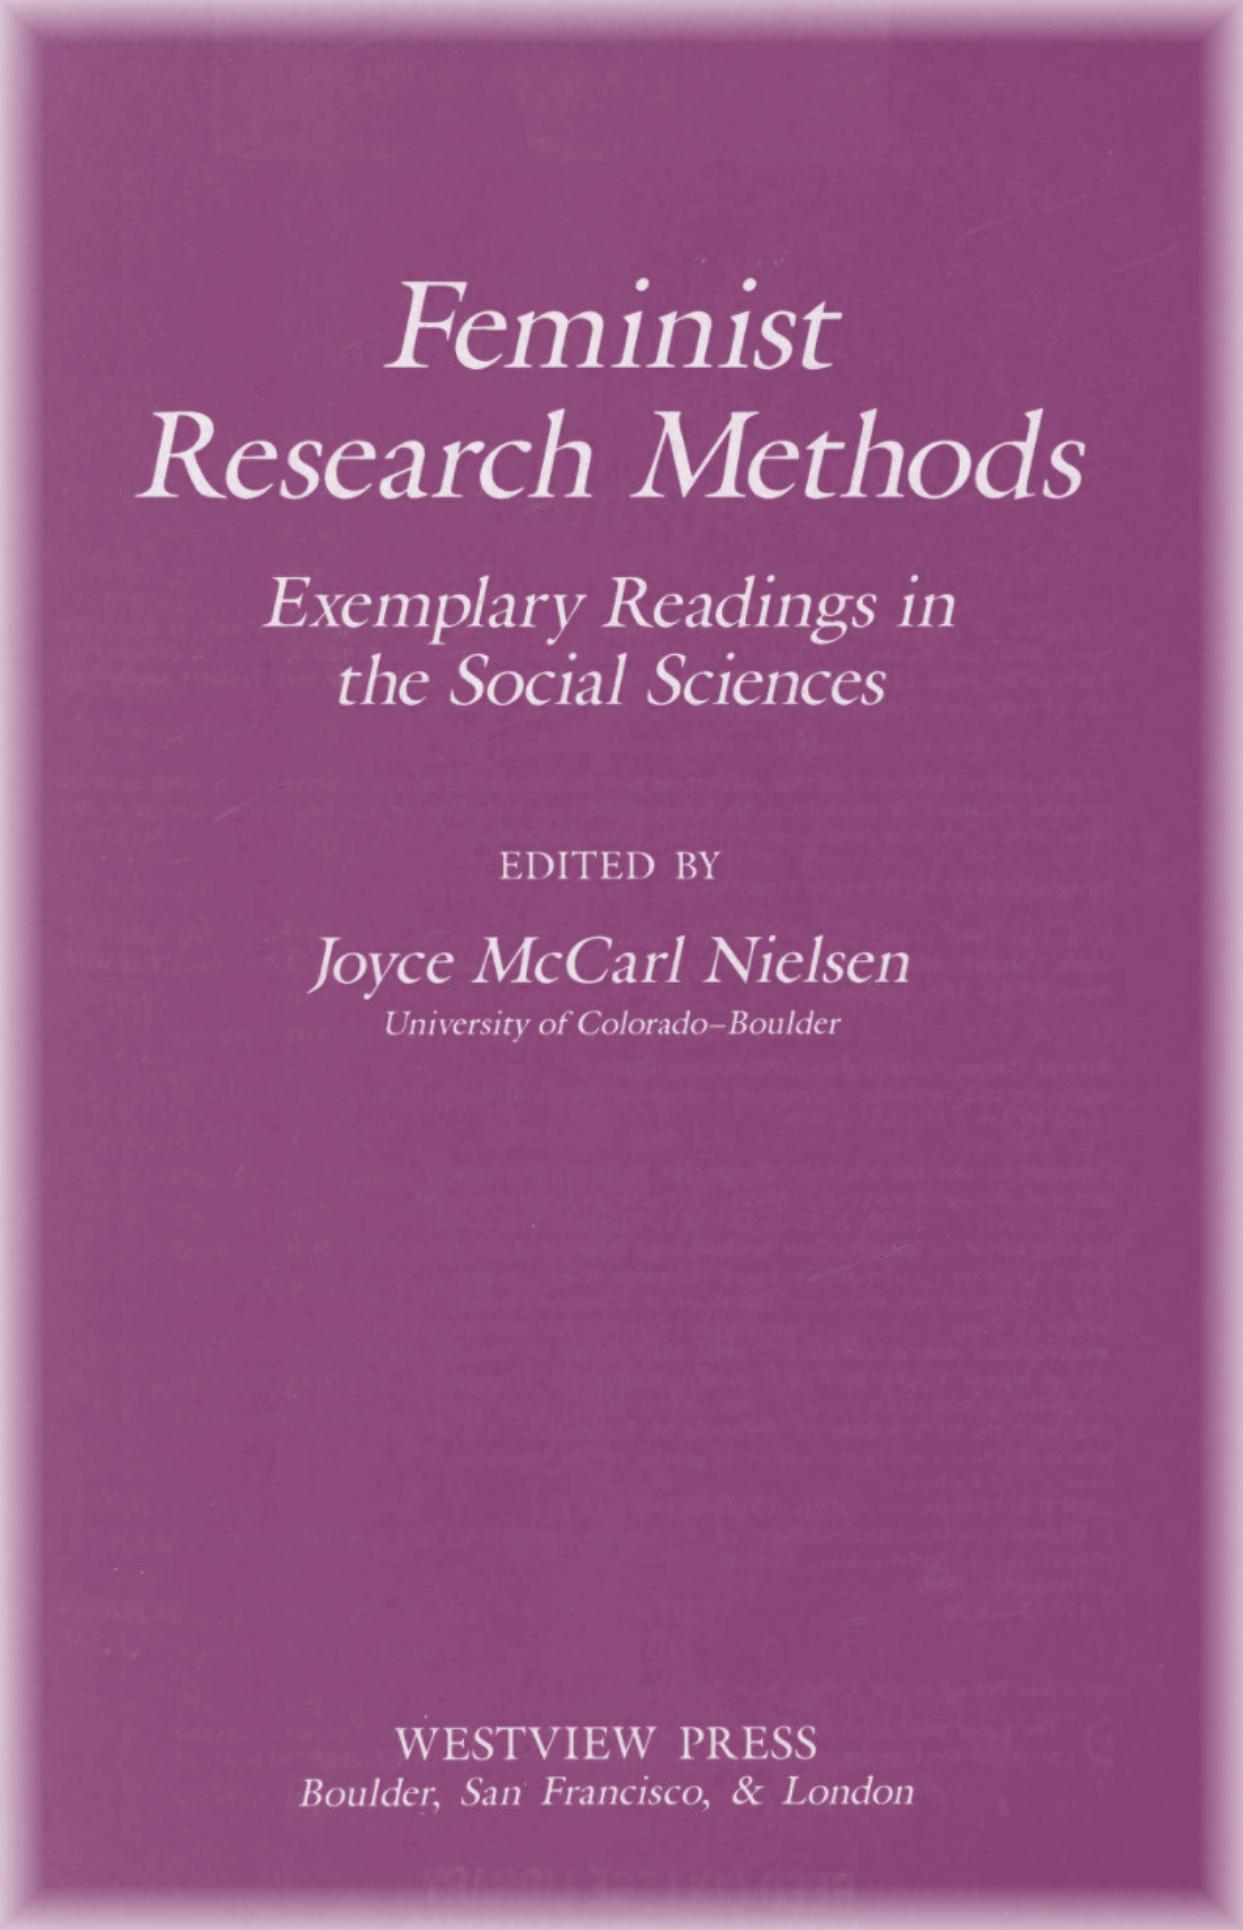 Feminist Research Methods: Exemplary Readings in the Social Sciences